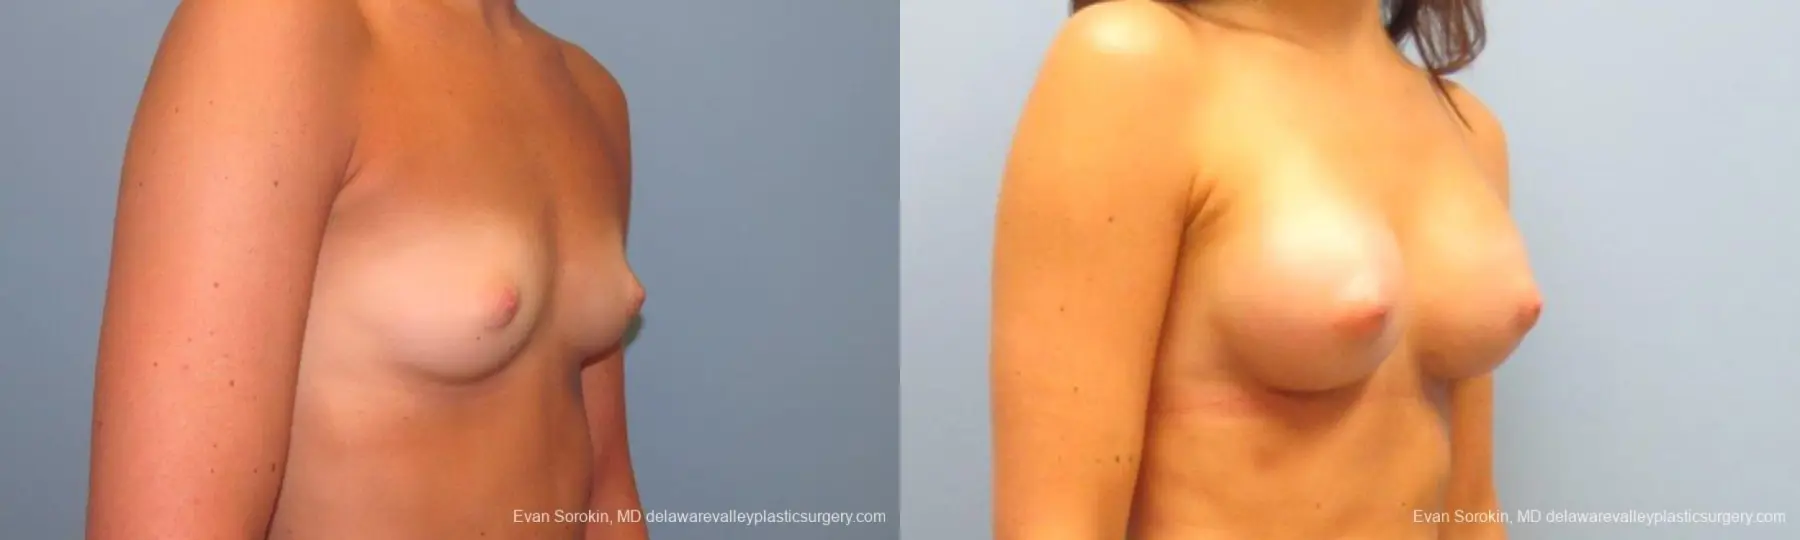 Philadelphia Breast Augmentation 9621 - Before and After 2